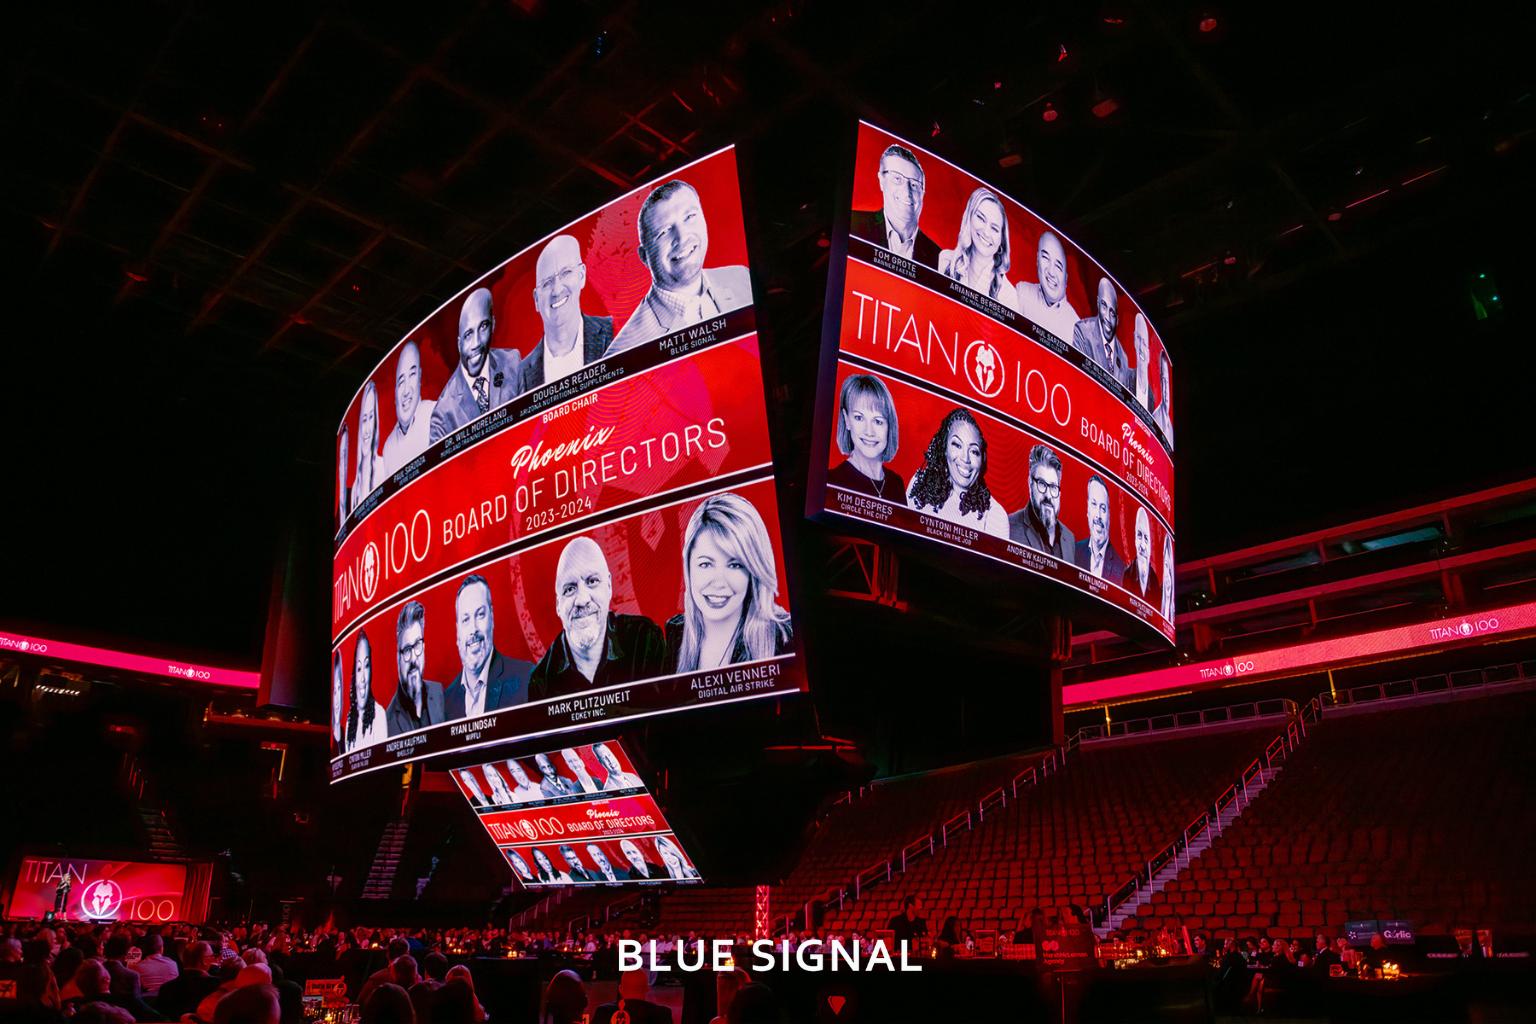 Image of the 2023-2024 Phoenix Titan 100 Board Of Directors displayed at the Desert Diamond Arena for the Phoenix Titan 100 event.